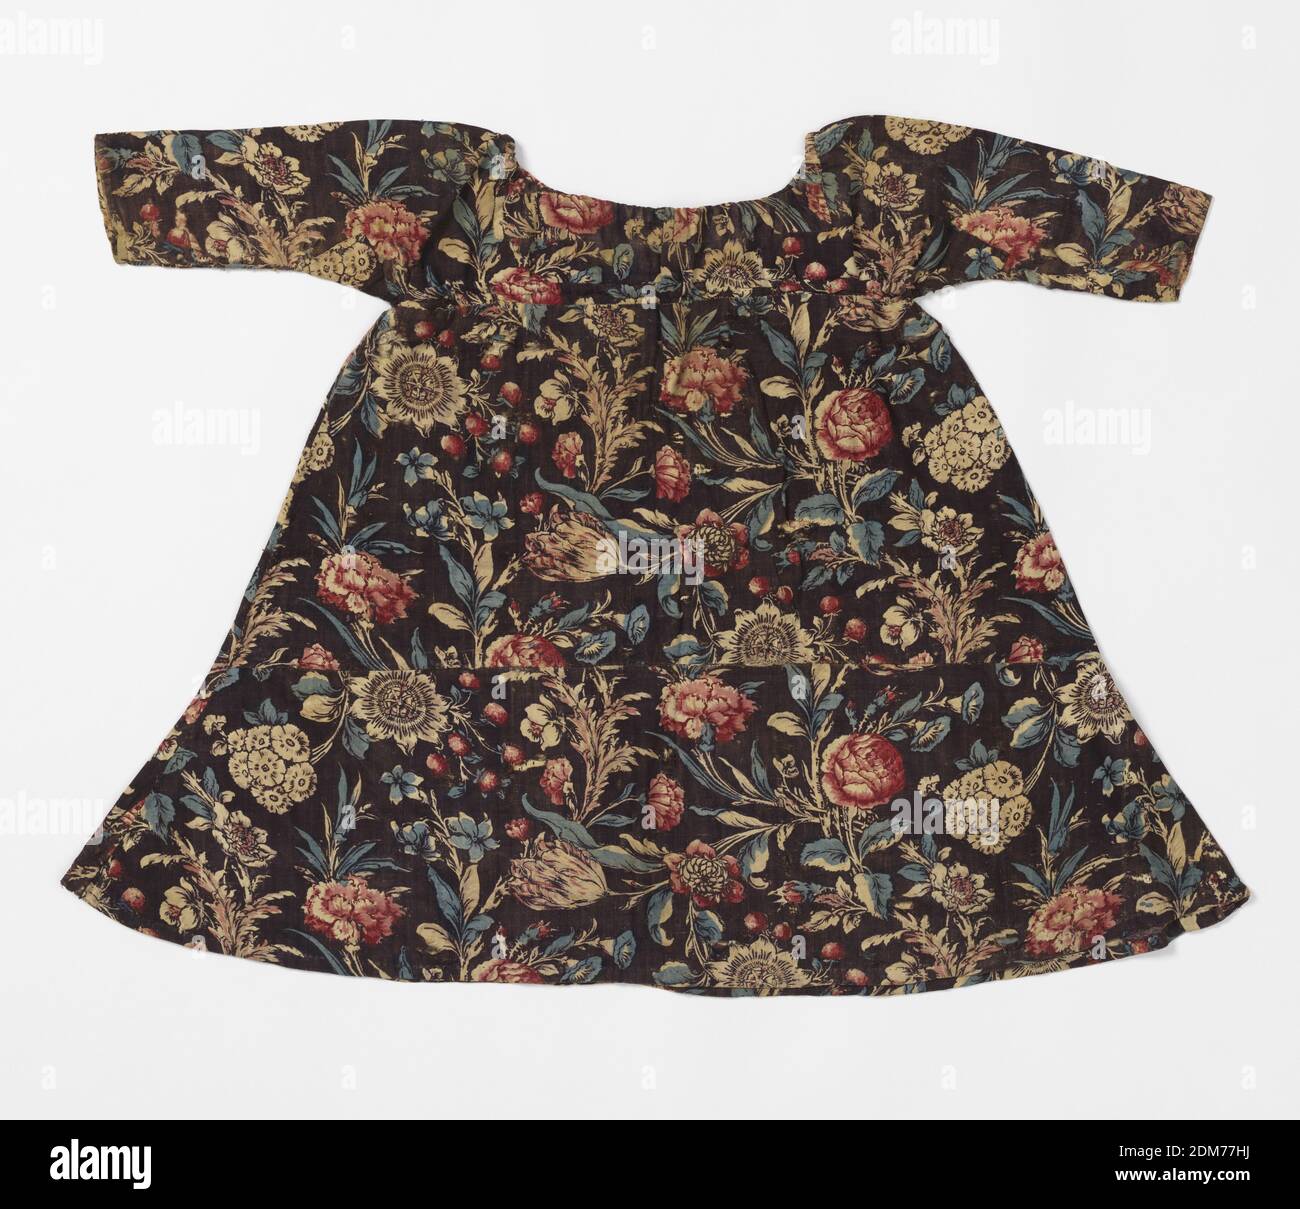 Child's dress, Medium: cotton Technique: block printed on plain weave, Child's dress with drawstrings around neck and chest, made up of pieces of printed cotton with dark brown groun and large-scale flowers and leaves, in red and blue, with traces of yellow., England, USA, late 18th–mid-19th century, costume & accessories, Child's dress Stock Photo